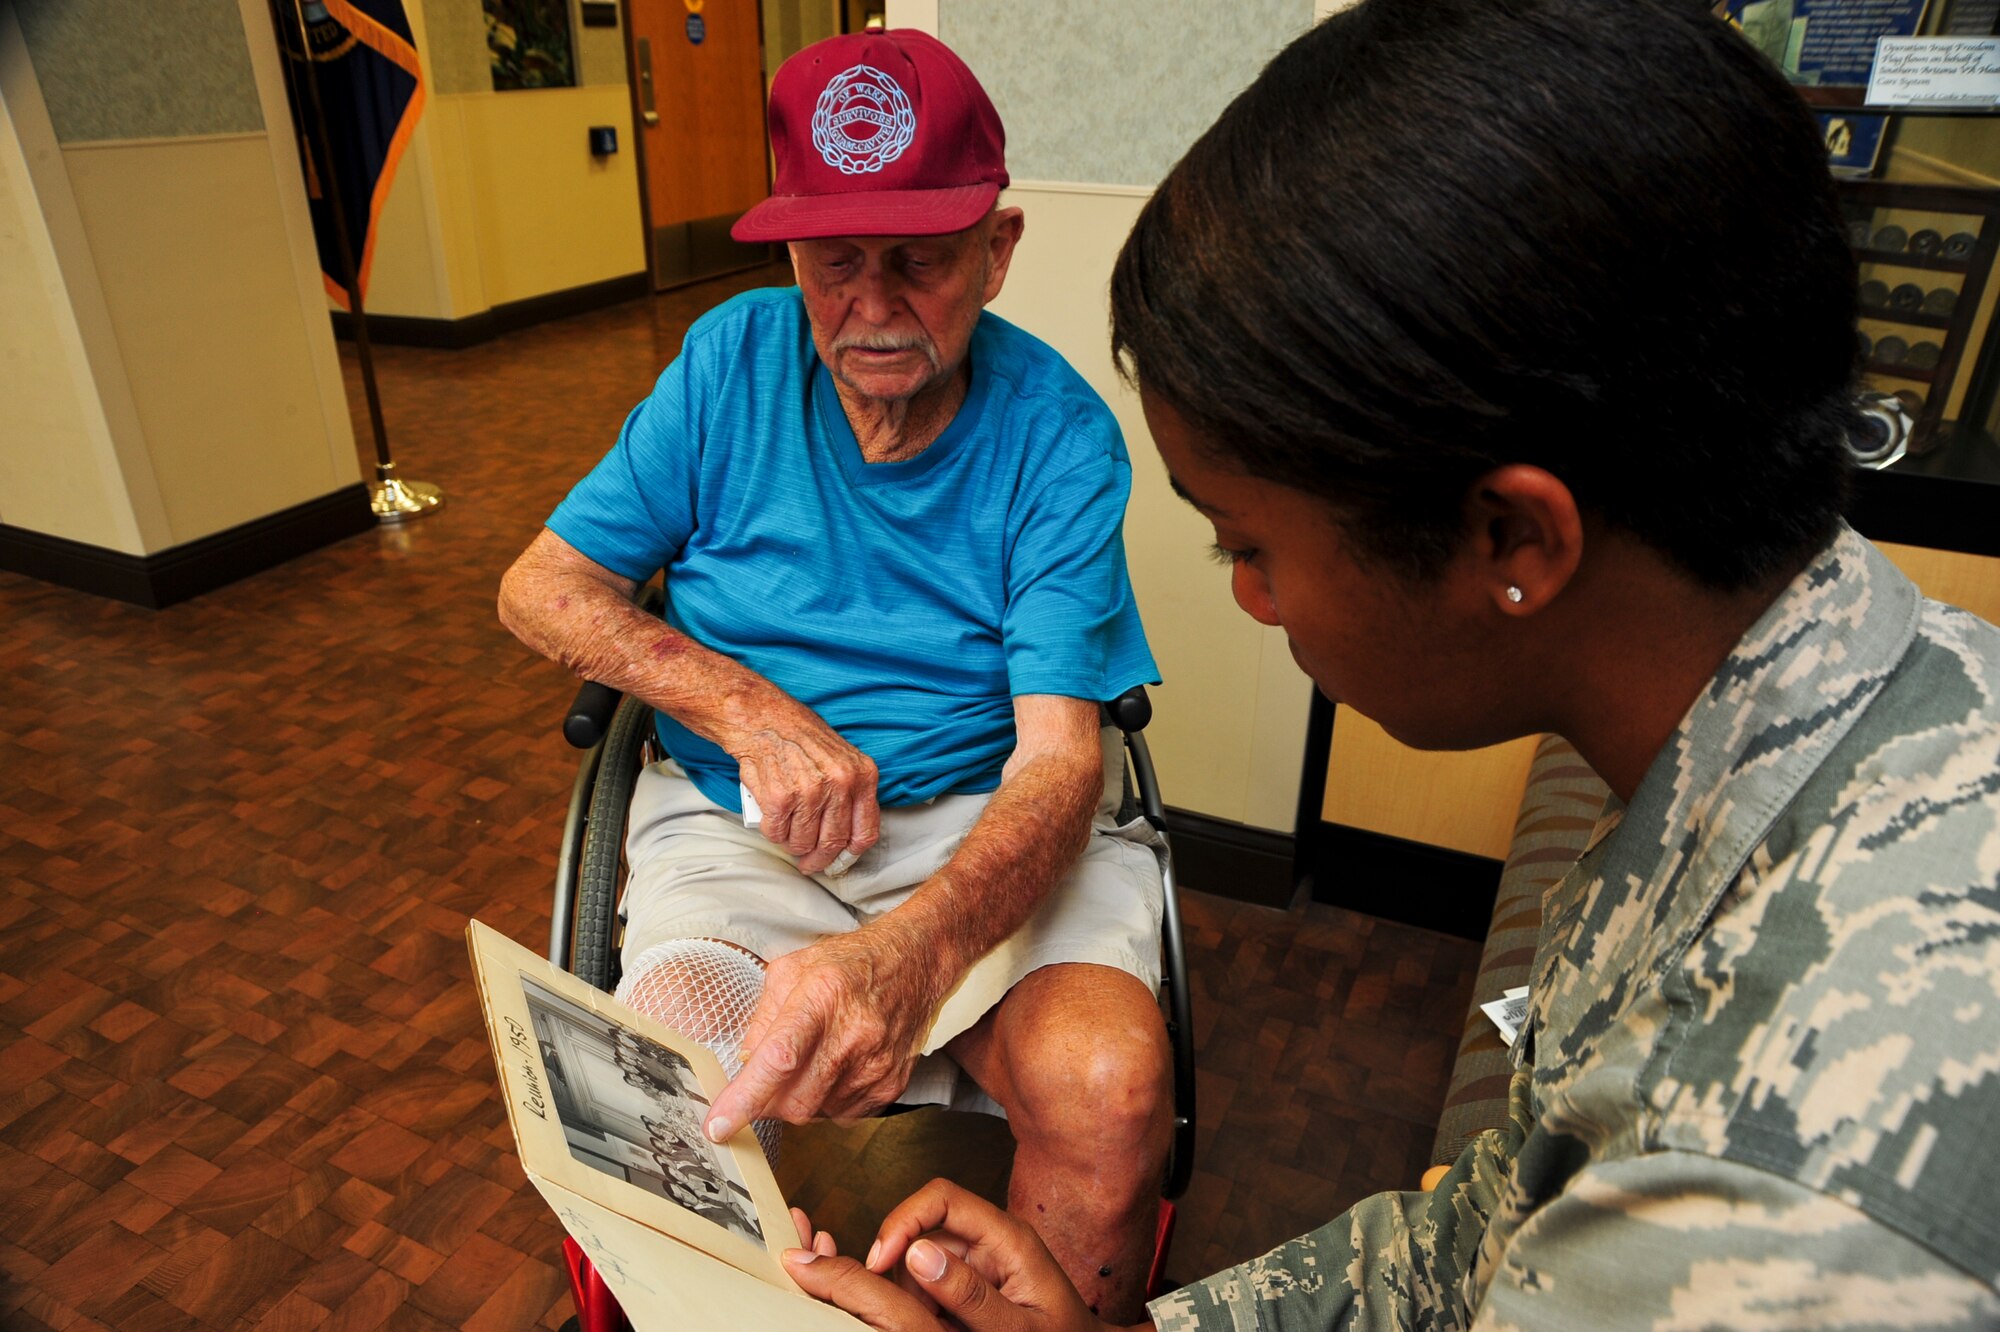 Malcolm Johnson, World War II veteran and former prisoner of war, shows U.S. Air Force Airman 1st Class Mya Crosby, 355th Fighter Wing Public Affairs photojournalist, a reunion photo of himself and fellow POWs at the Tucson Veterans Center in Tucson, Ariz., Aug. 18, 2015. Johnson was a civilian contractor when he was captured in December 1941, then put into internment camps throughout China and Japan for nearly four years. (U.S. Air Force photo by Senior Airman Chris Massey/Released)